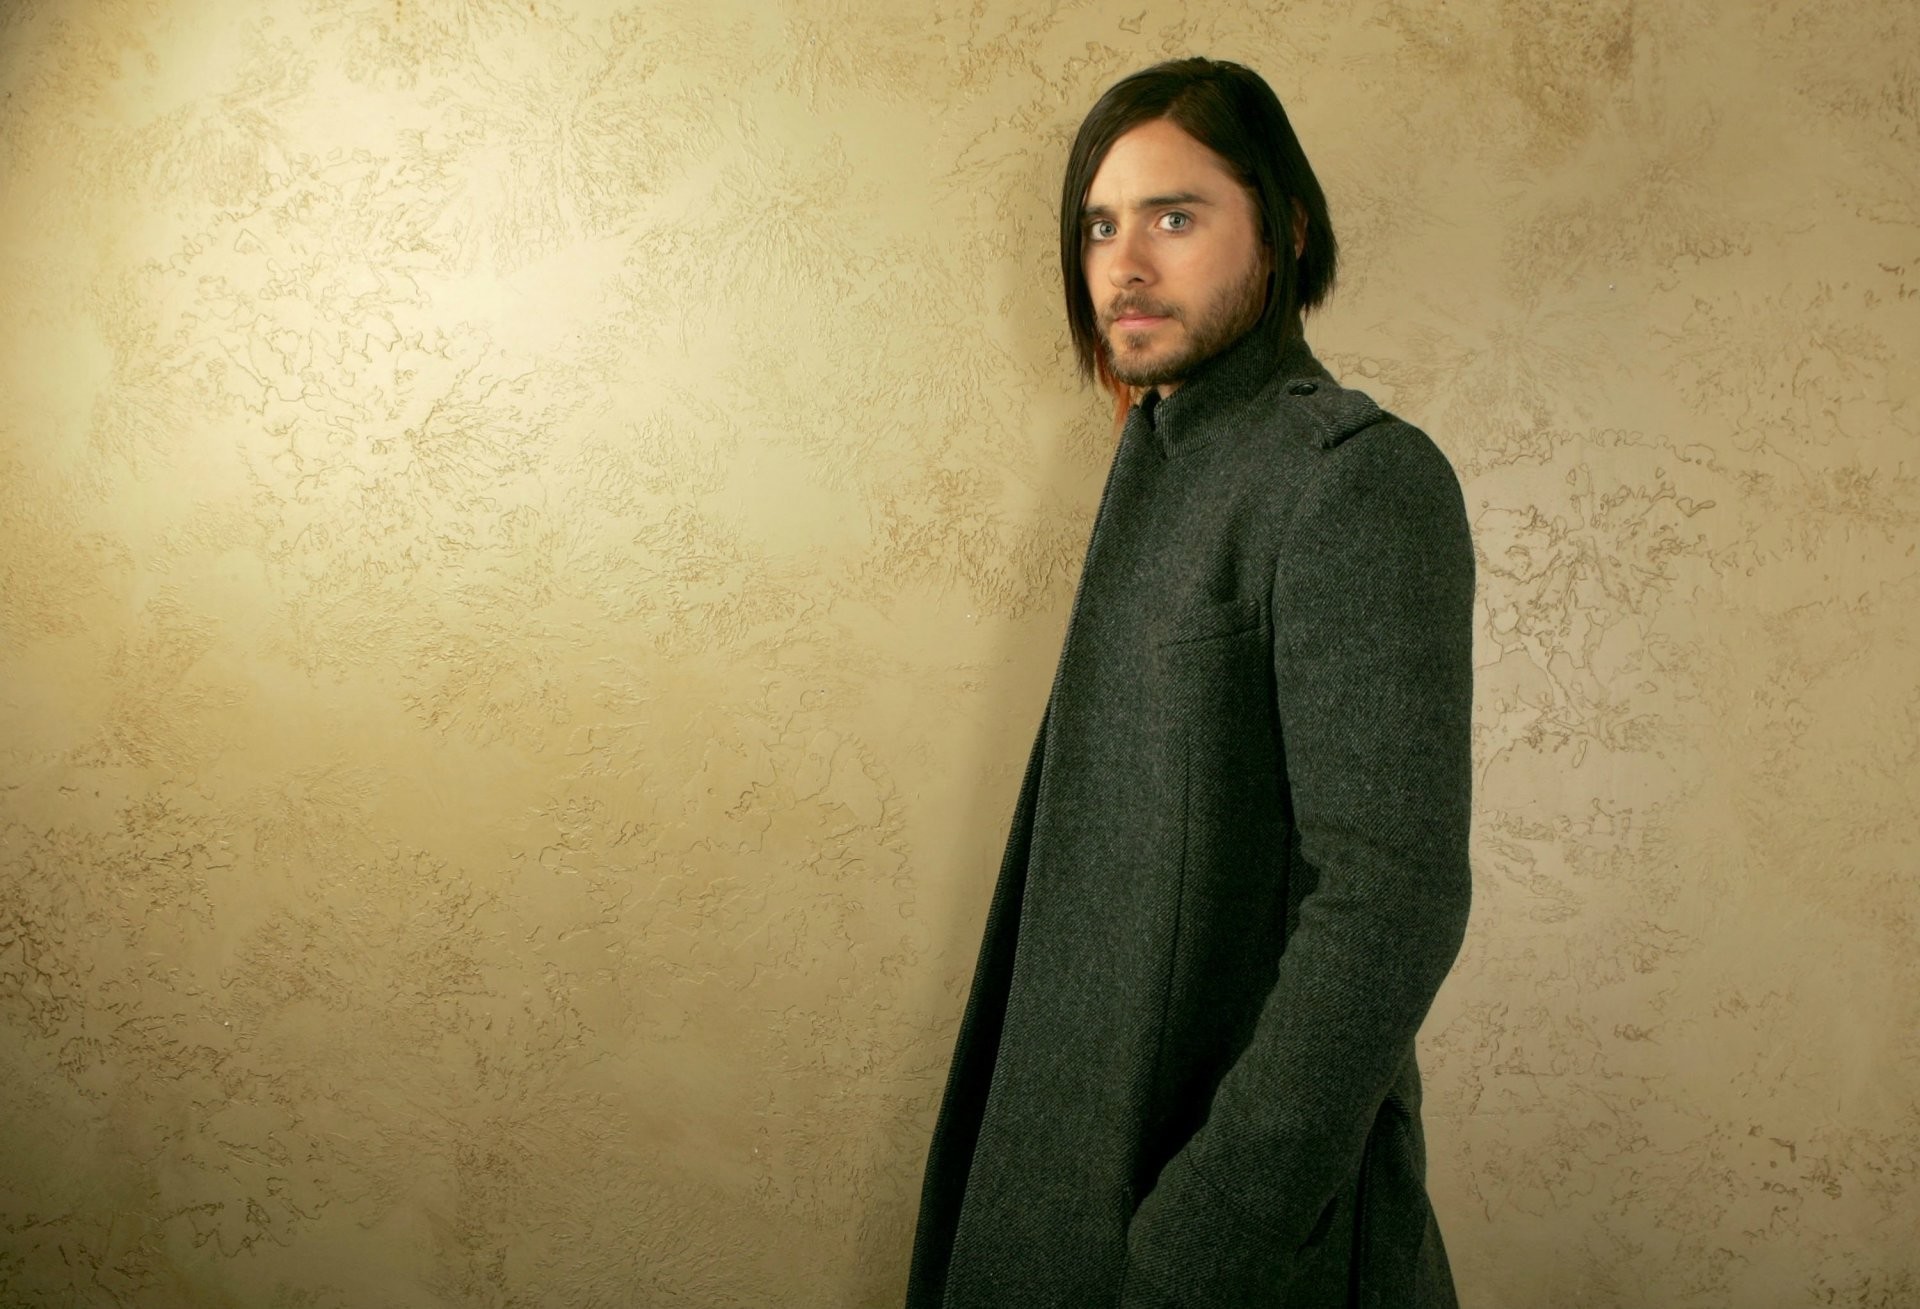 Jared Leto Wallpapers